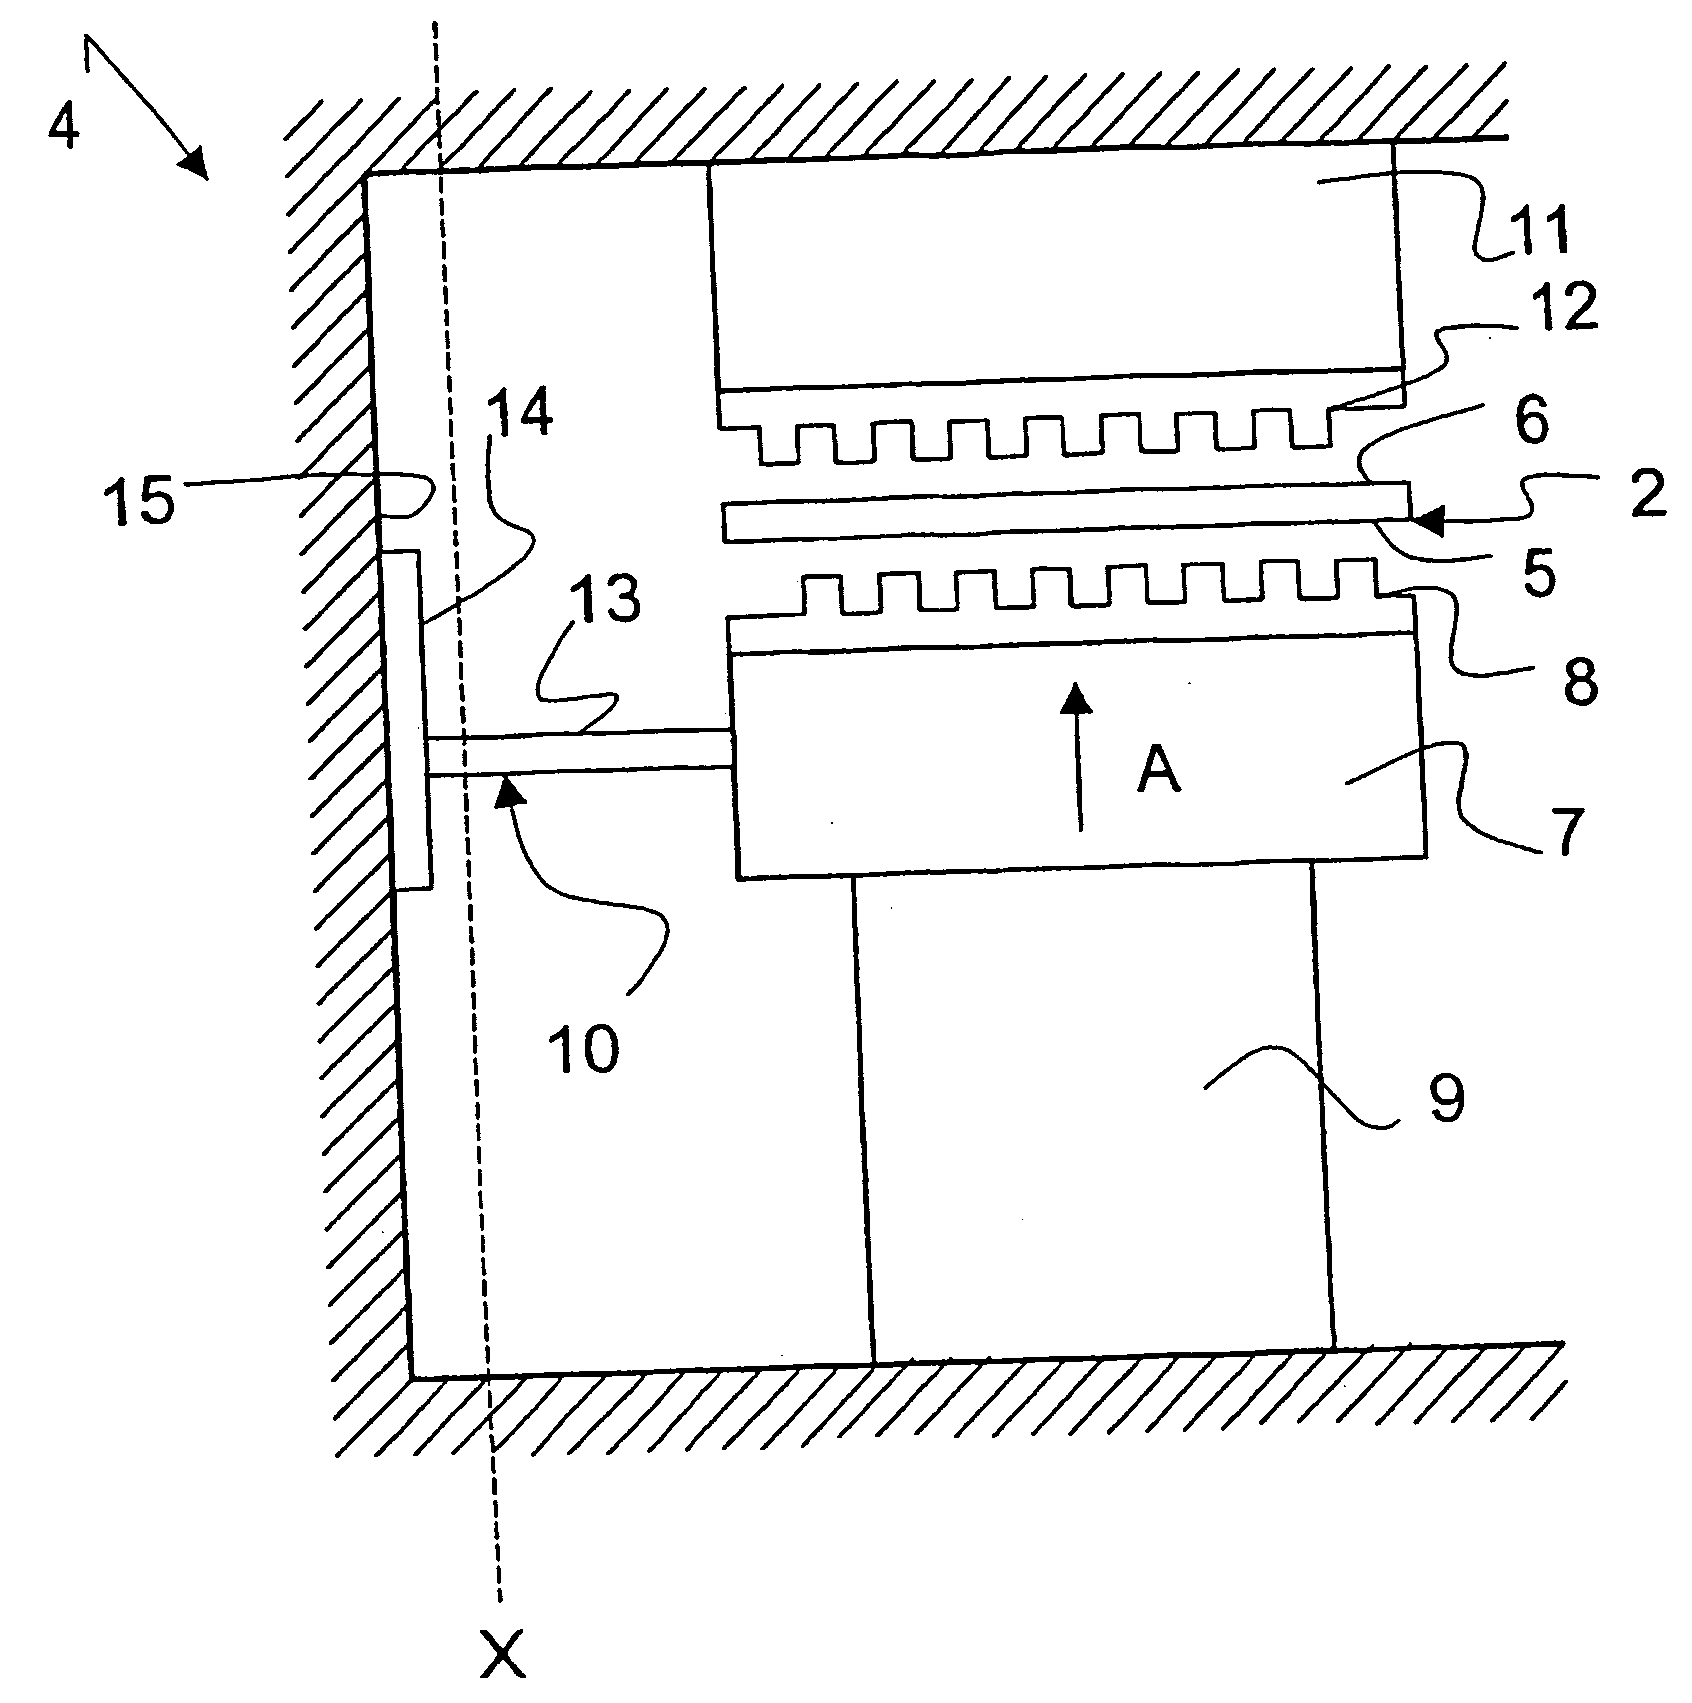 Device for transferring a pattern to an object